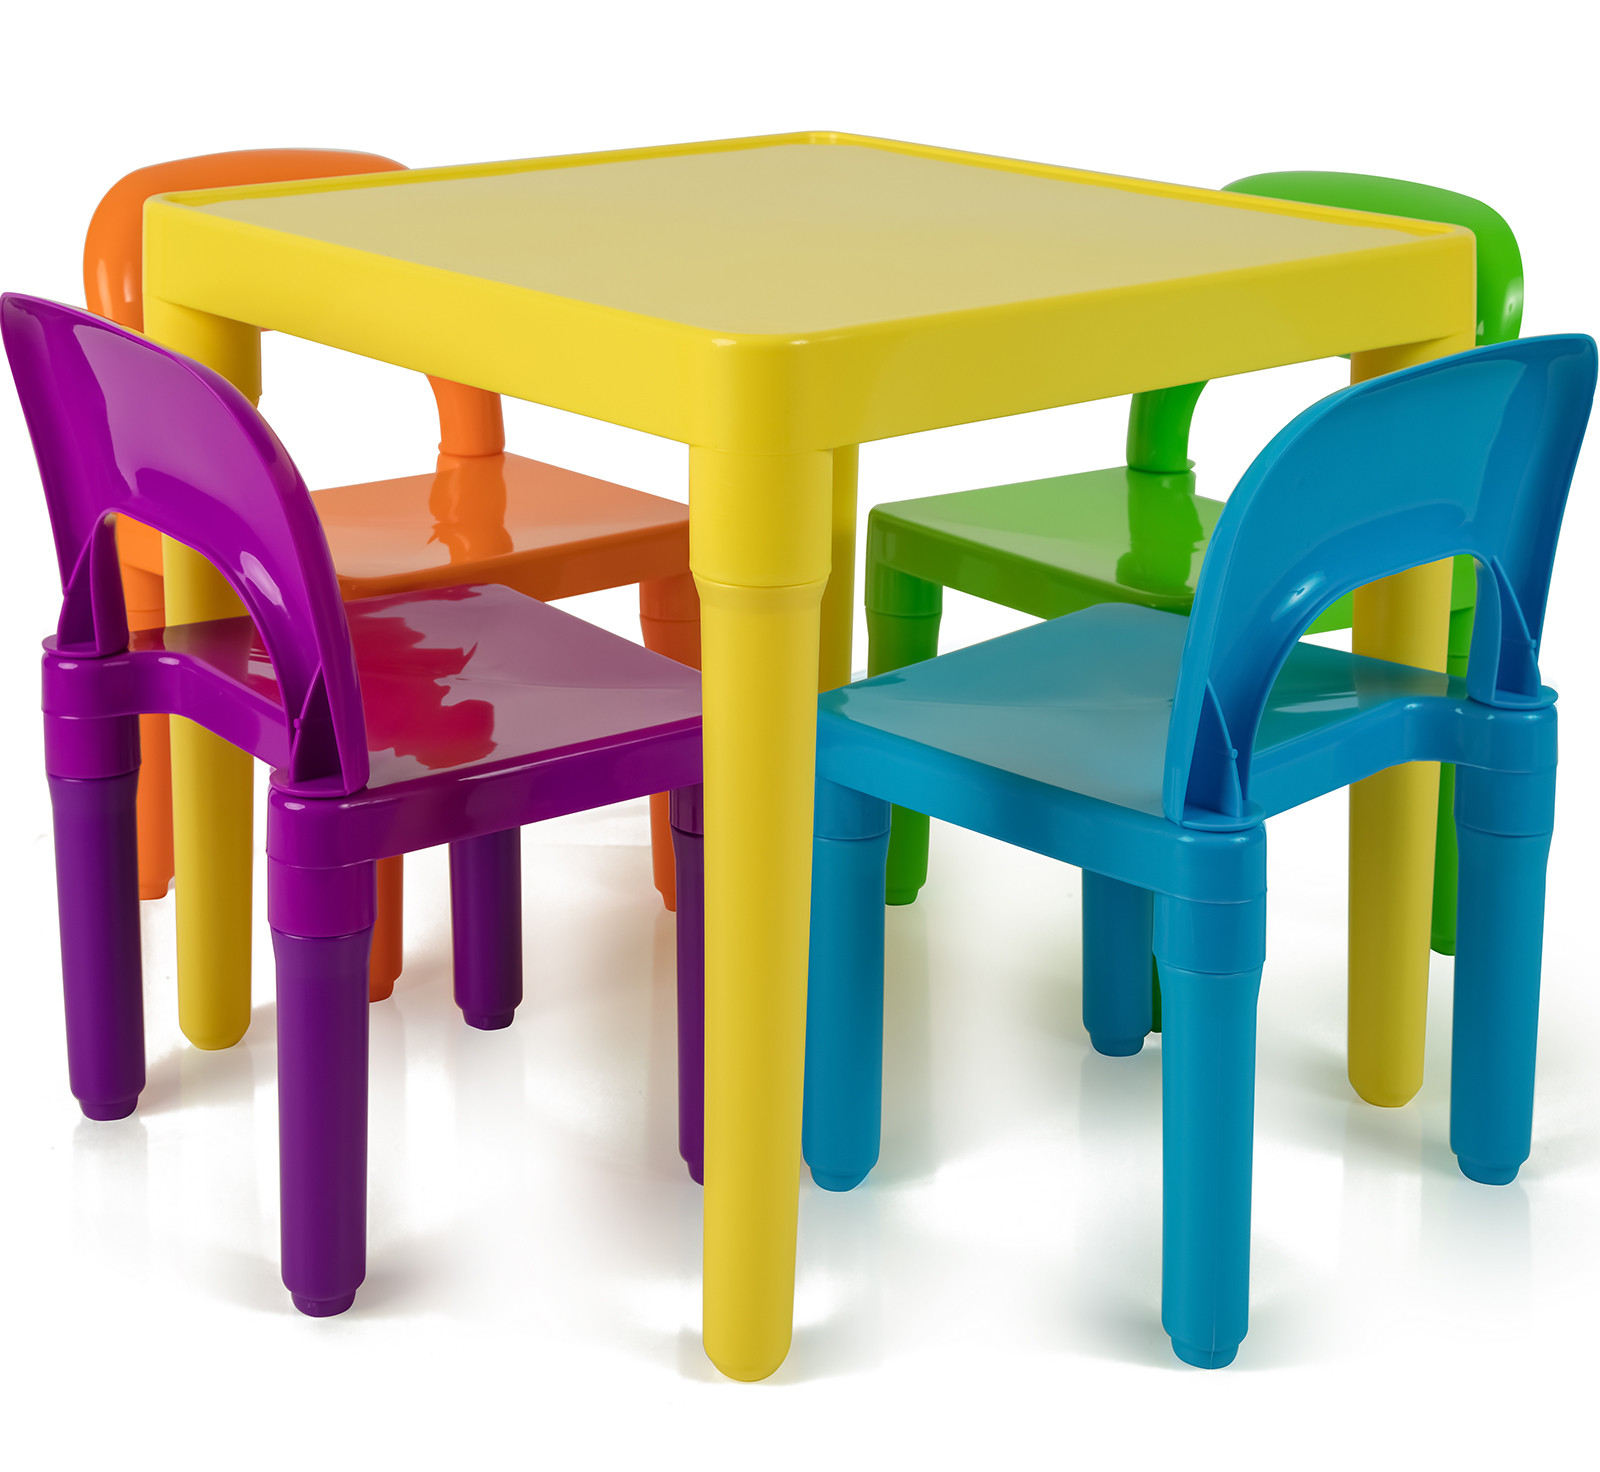 The Kids Table
 Kids Table and Chairs Play Set Toddler Child Toy Activity